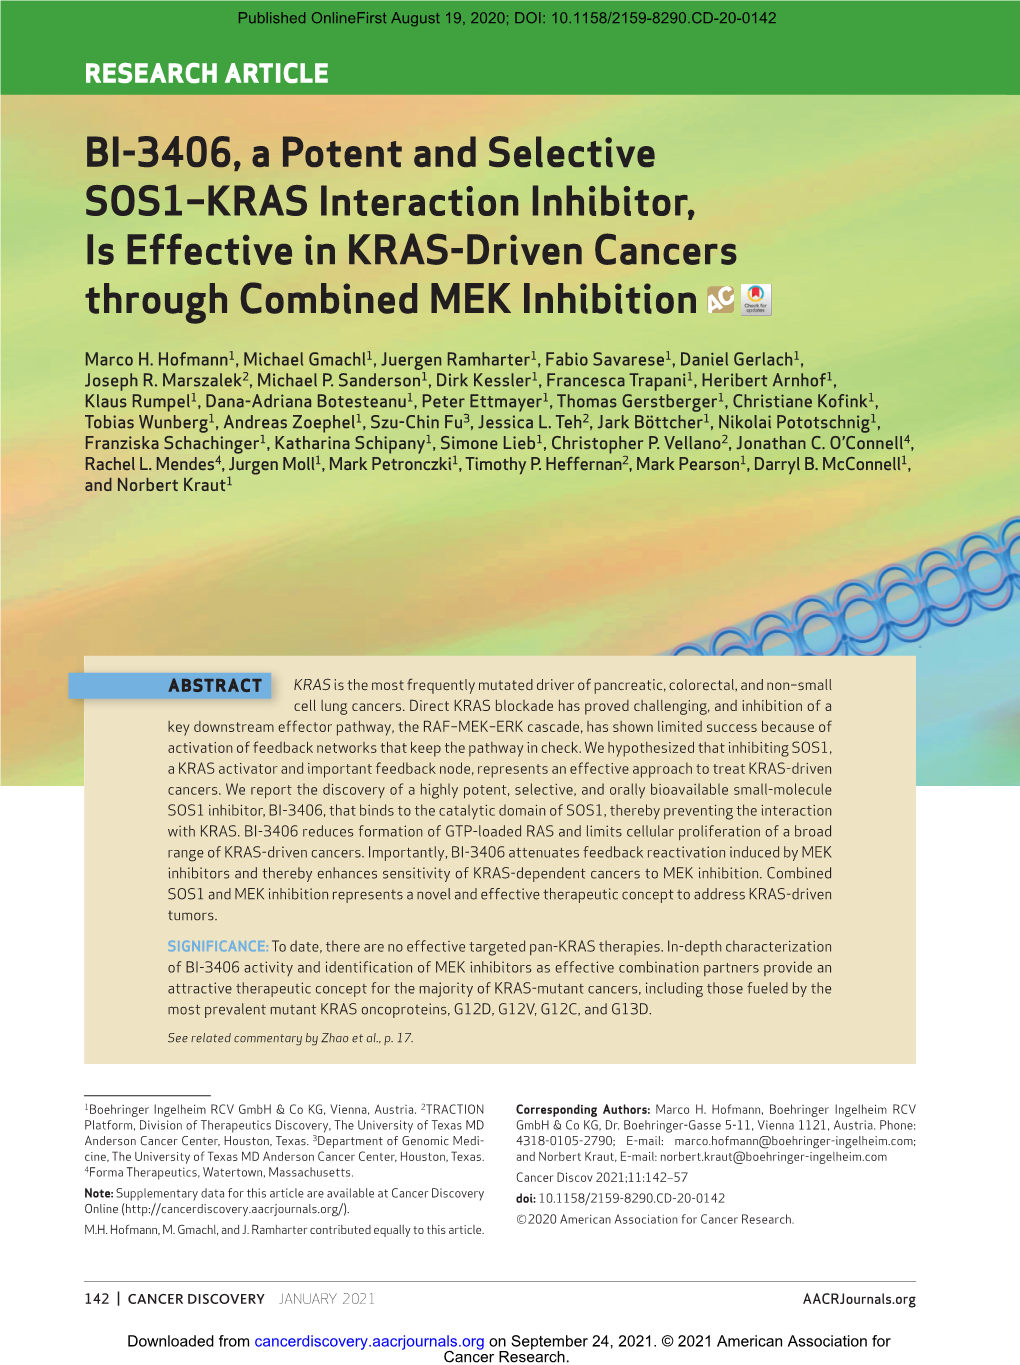 BI-3406, a Potent and Selective SOS1–KRAS Interaction Inhibitor, Is Effective in KRAS-Driven Cancers Through Combined MEK Inhibition